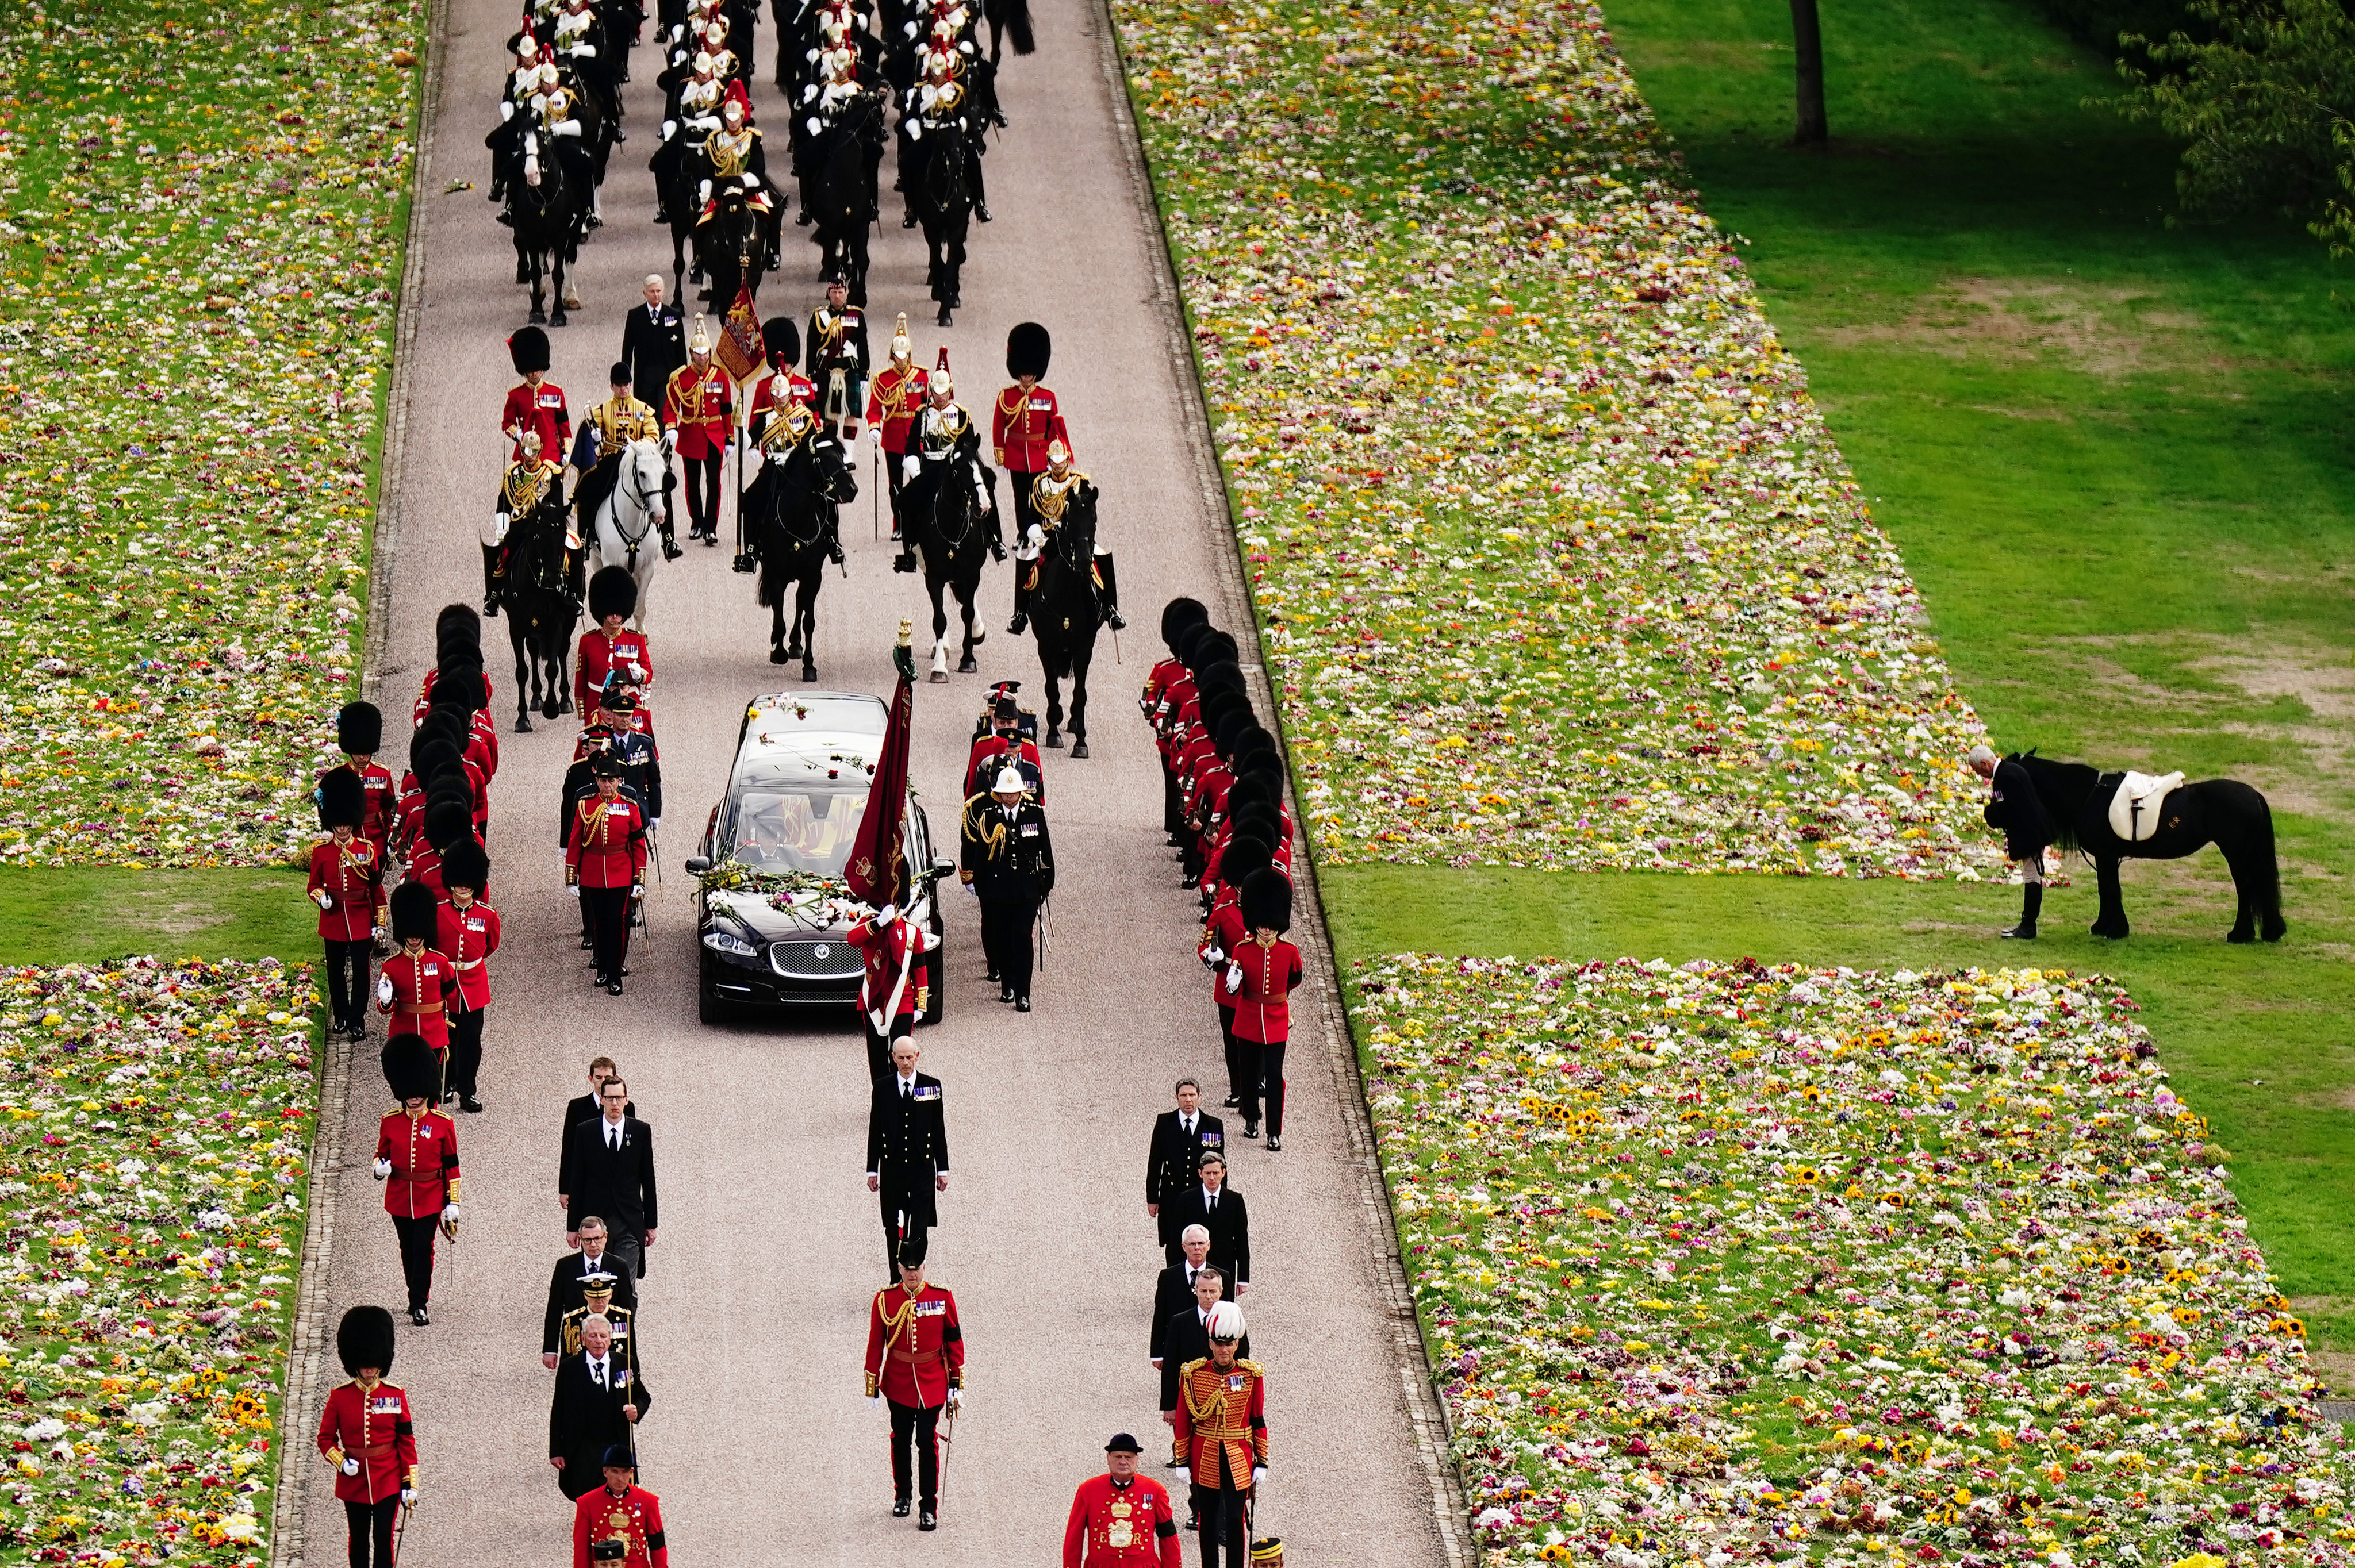 <p>Surrounded by thousands of flowers left by mourners, Emma -- the fell pony Queen Elizabeth II loved to ride around the grounds of her estate in Windsor, England -- stood riderless, watching as the monarch's coffin passed by and returned to Windsor Castle for the final time for <a href="https://www.wonderwall.com/celebrity/royals/best-photos-from-queen-elizabeth-ii-funeral-king-charles-princes-william-prince-harry-george-charlotte-kate-meghan652347.gallery">her interment at St. George's Chapel</a> on Sept. 19, 2022. </p>